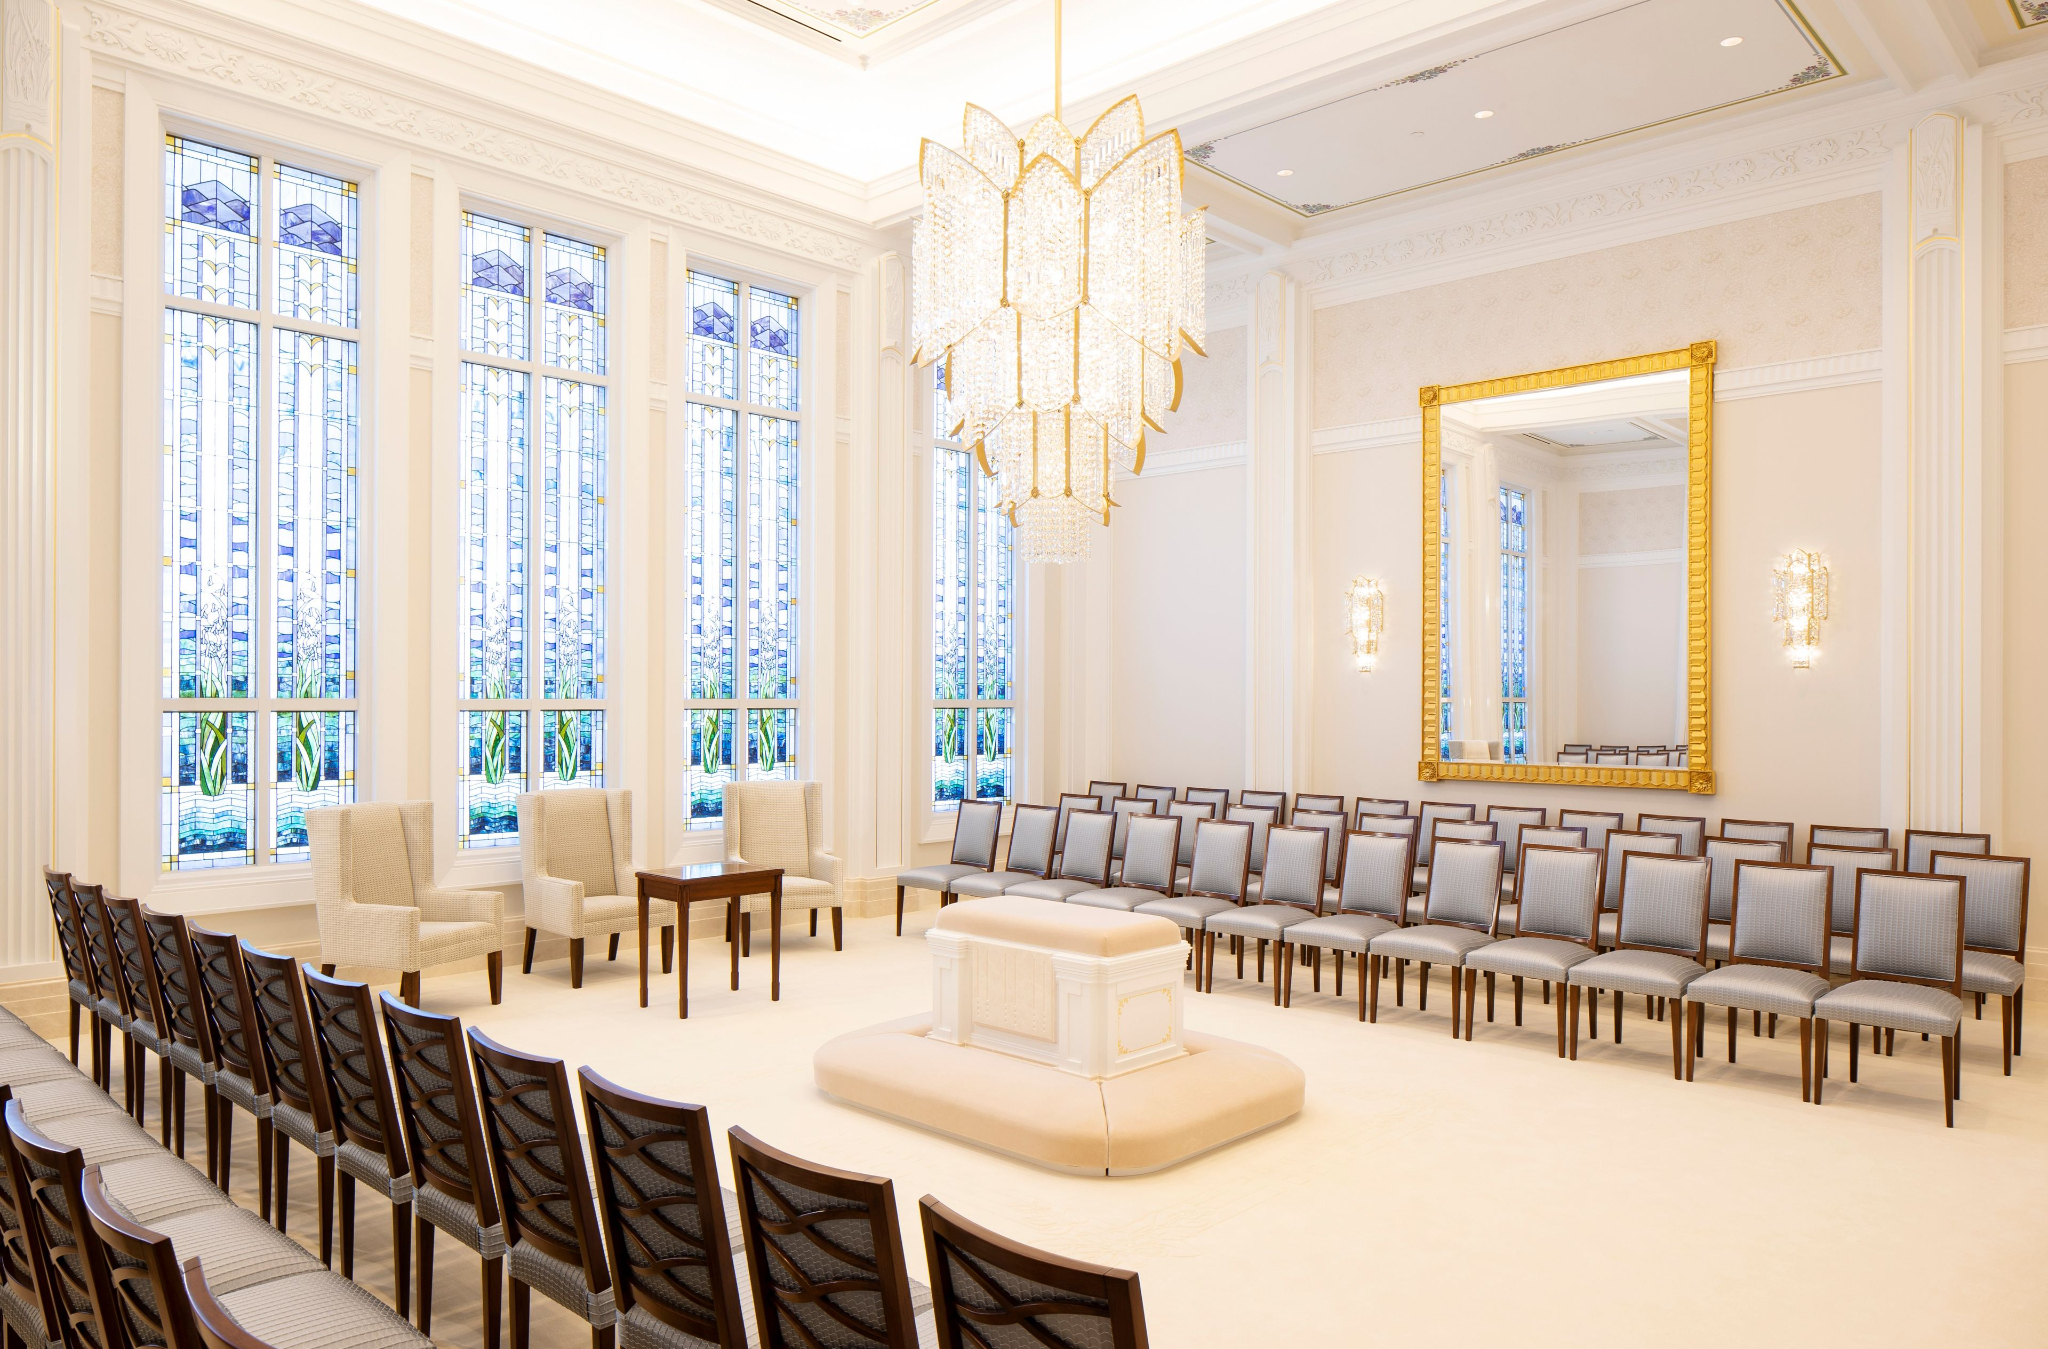 A white room with rows of chairs on two sides, a white altar in the center, and a rectangular mirror with a golden border on the wall.